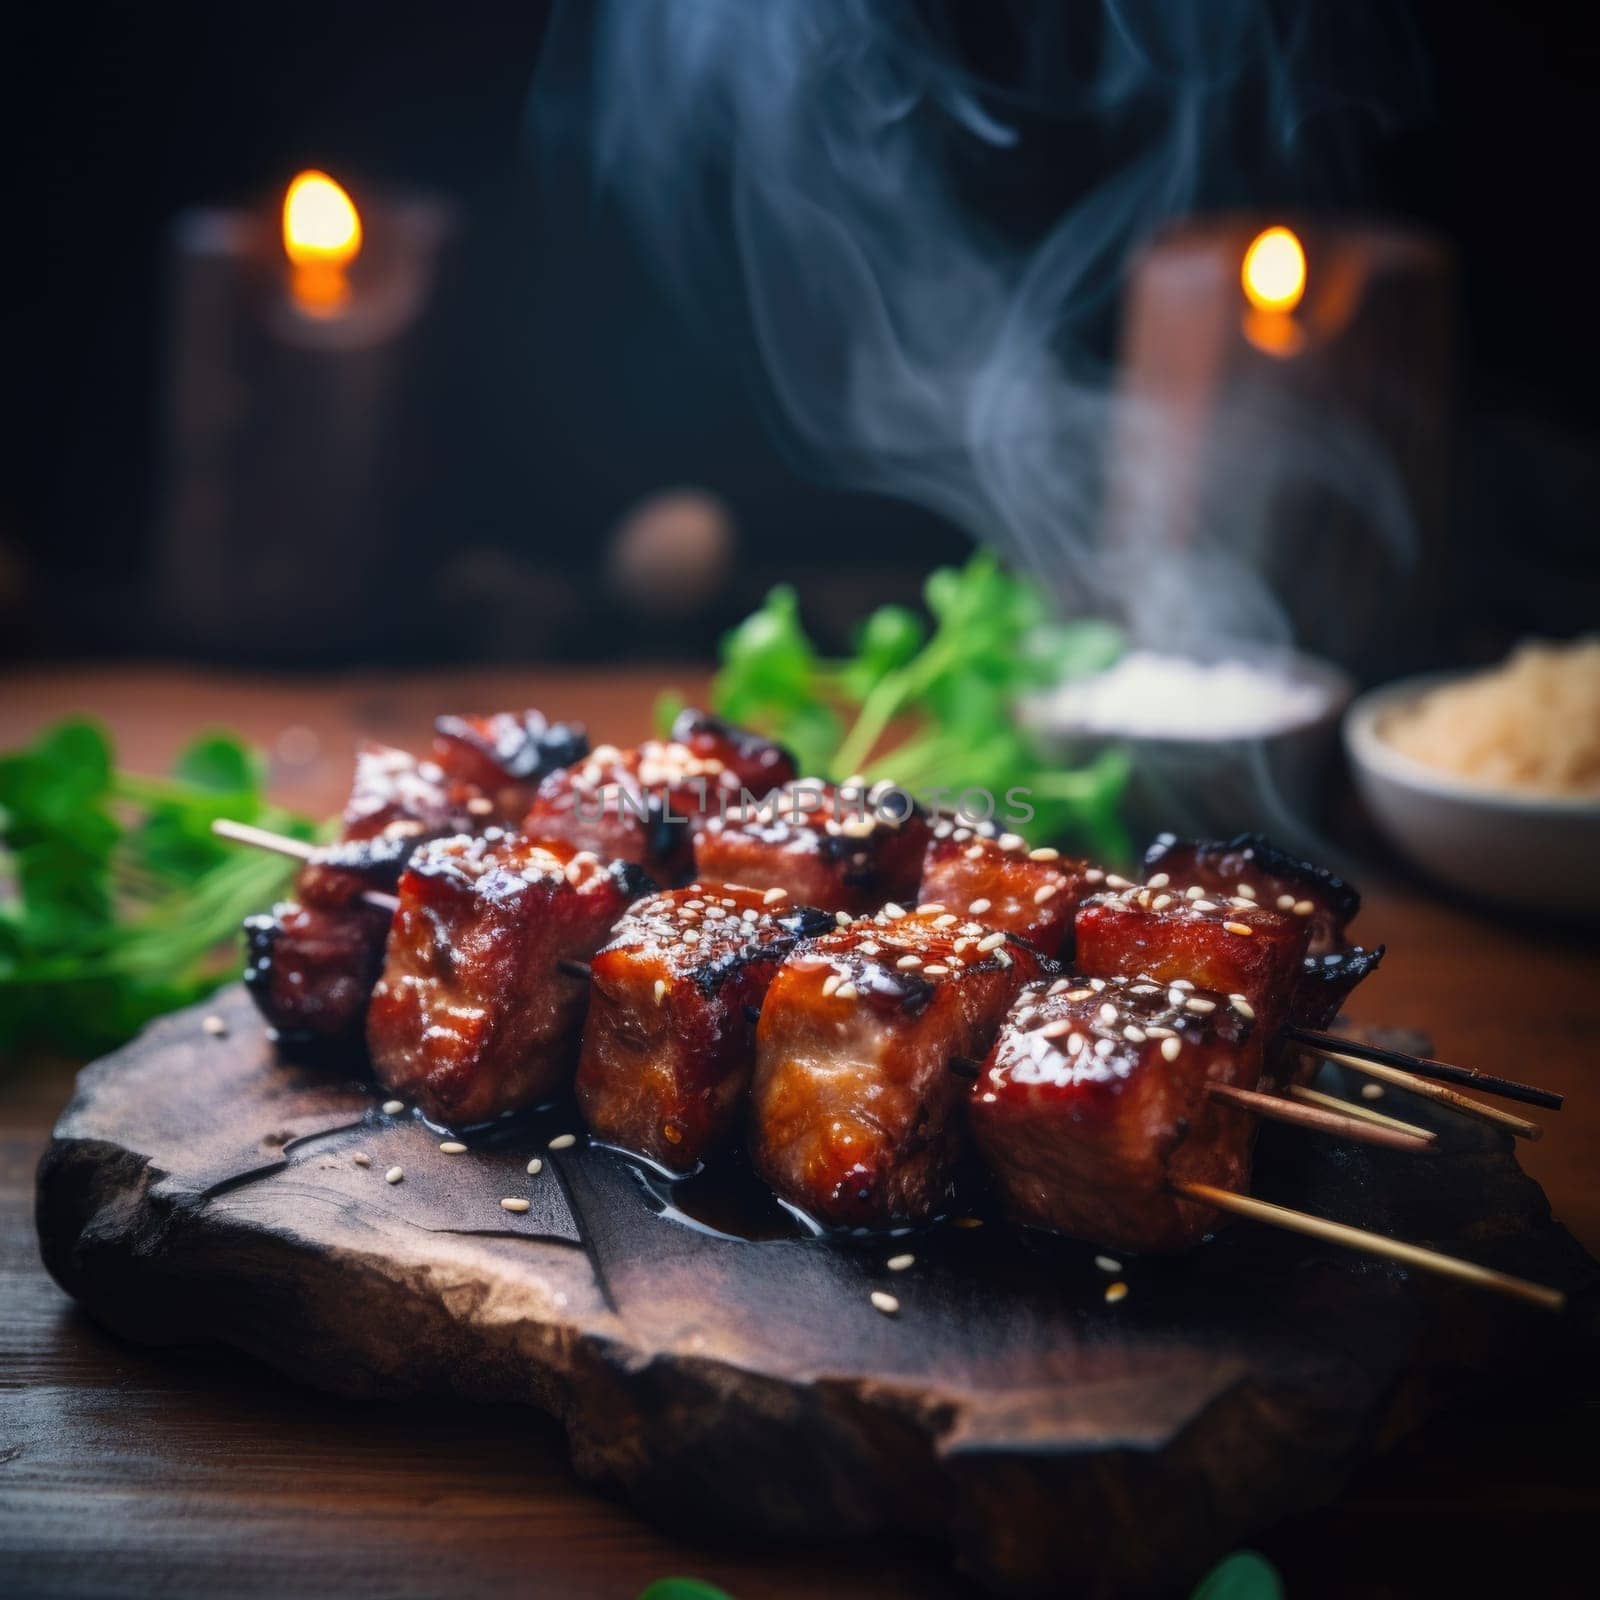 Grilled meat skewers on wooden board with smoke, AI by starush